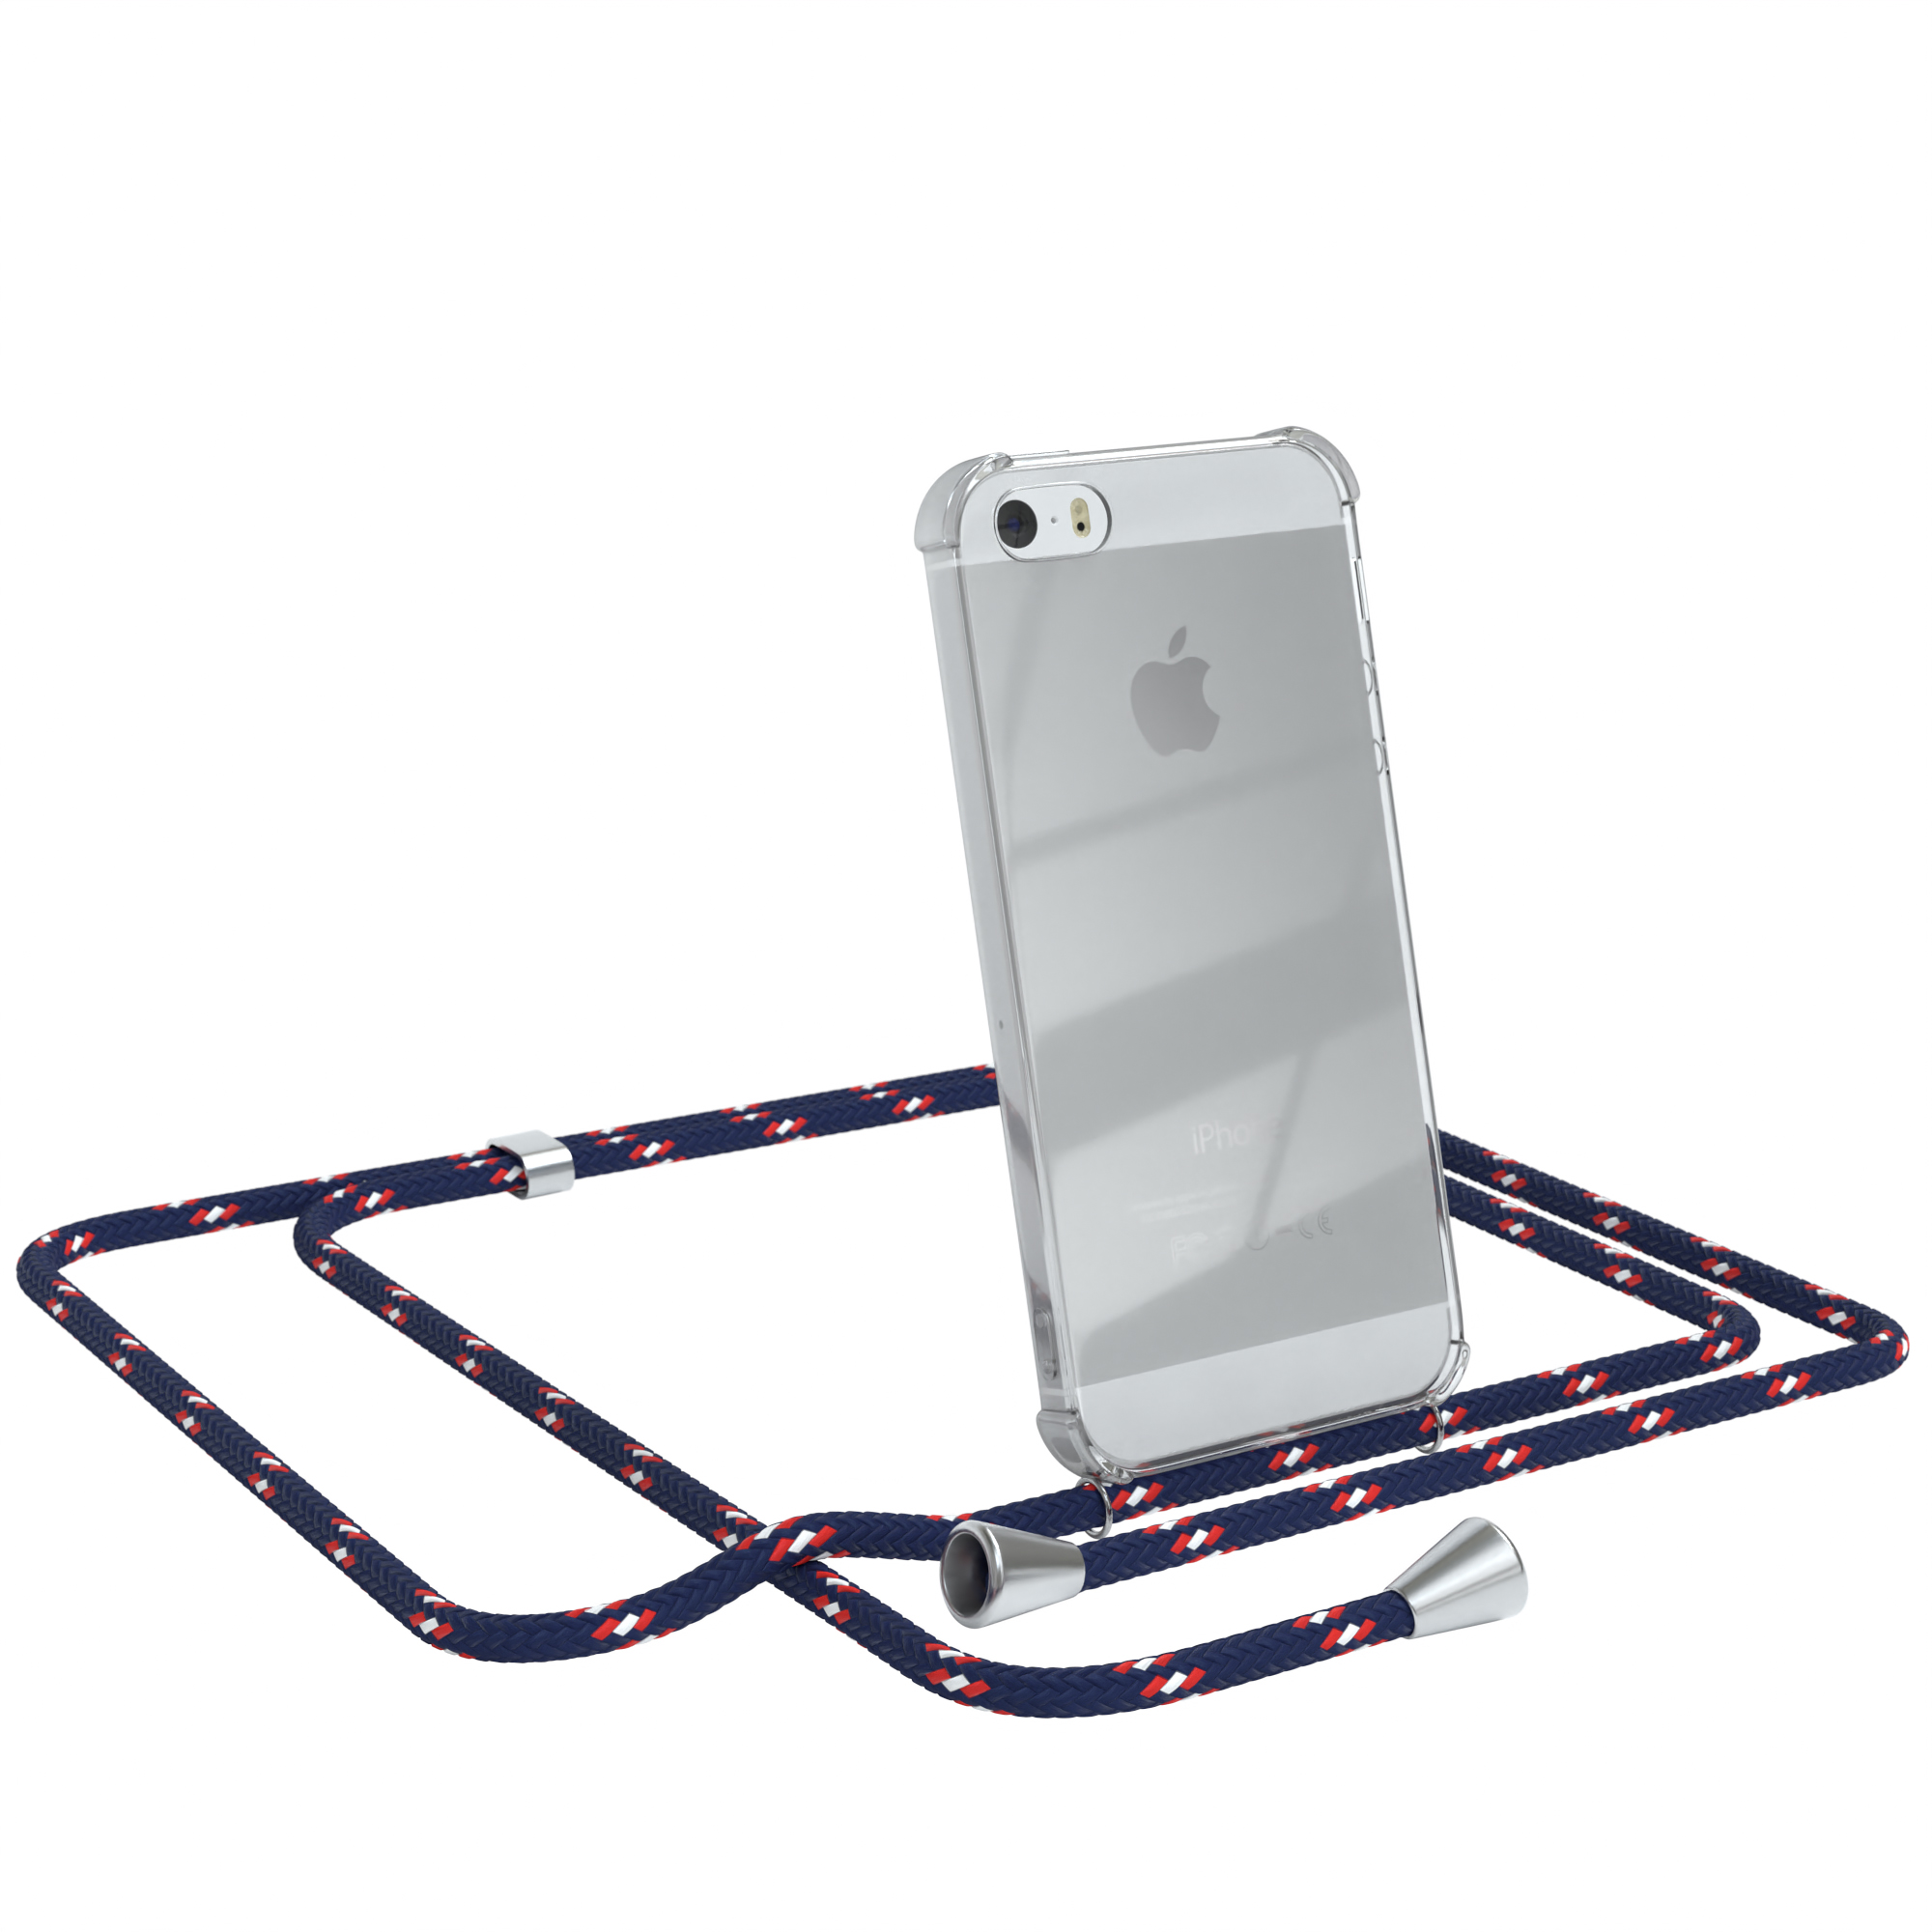 5 Cover EAZY mit / SE Umhängetasche, 2016, CASE iPhone Camouflage Silber Apple, Clips iPhone Umhängeband, Blau 5S, Clear /